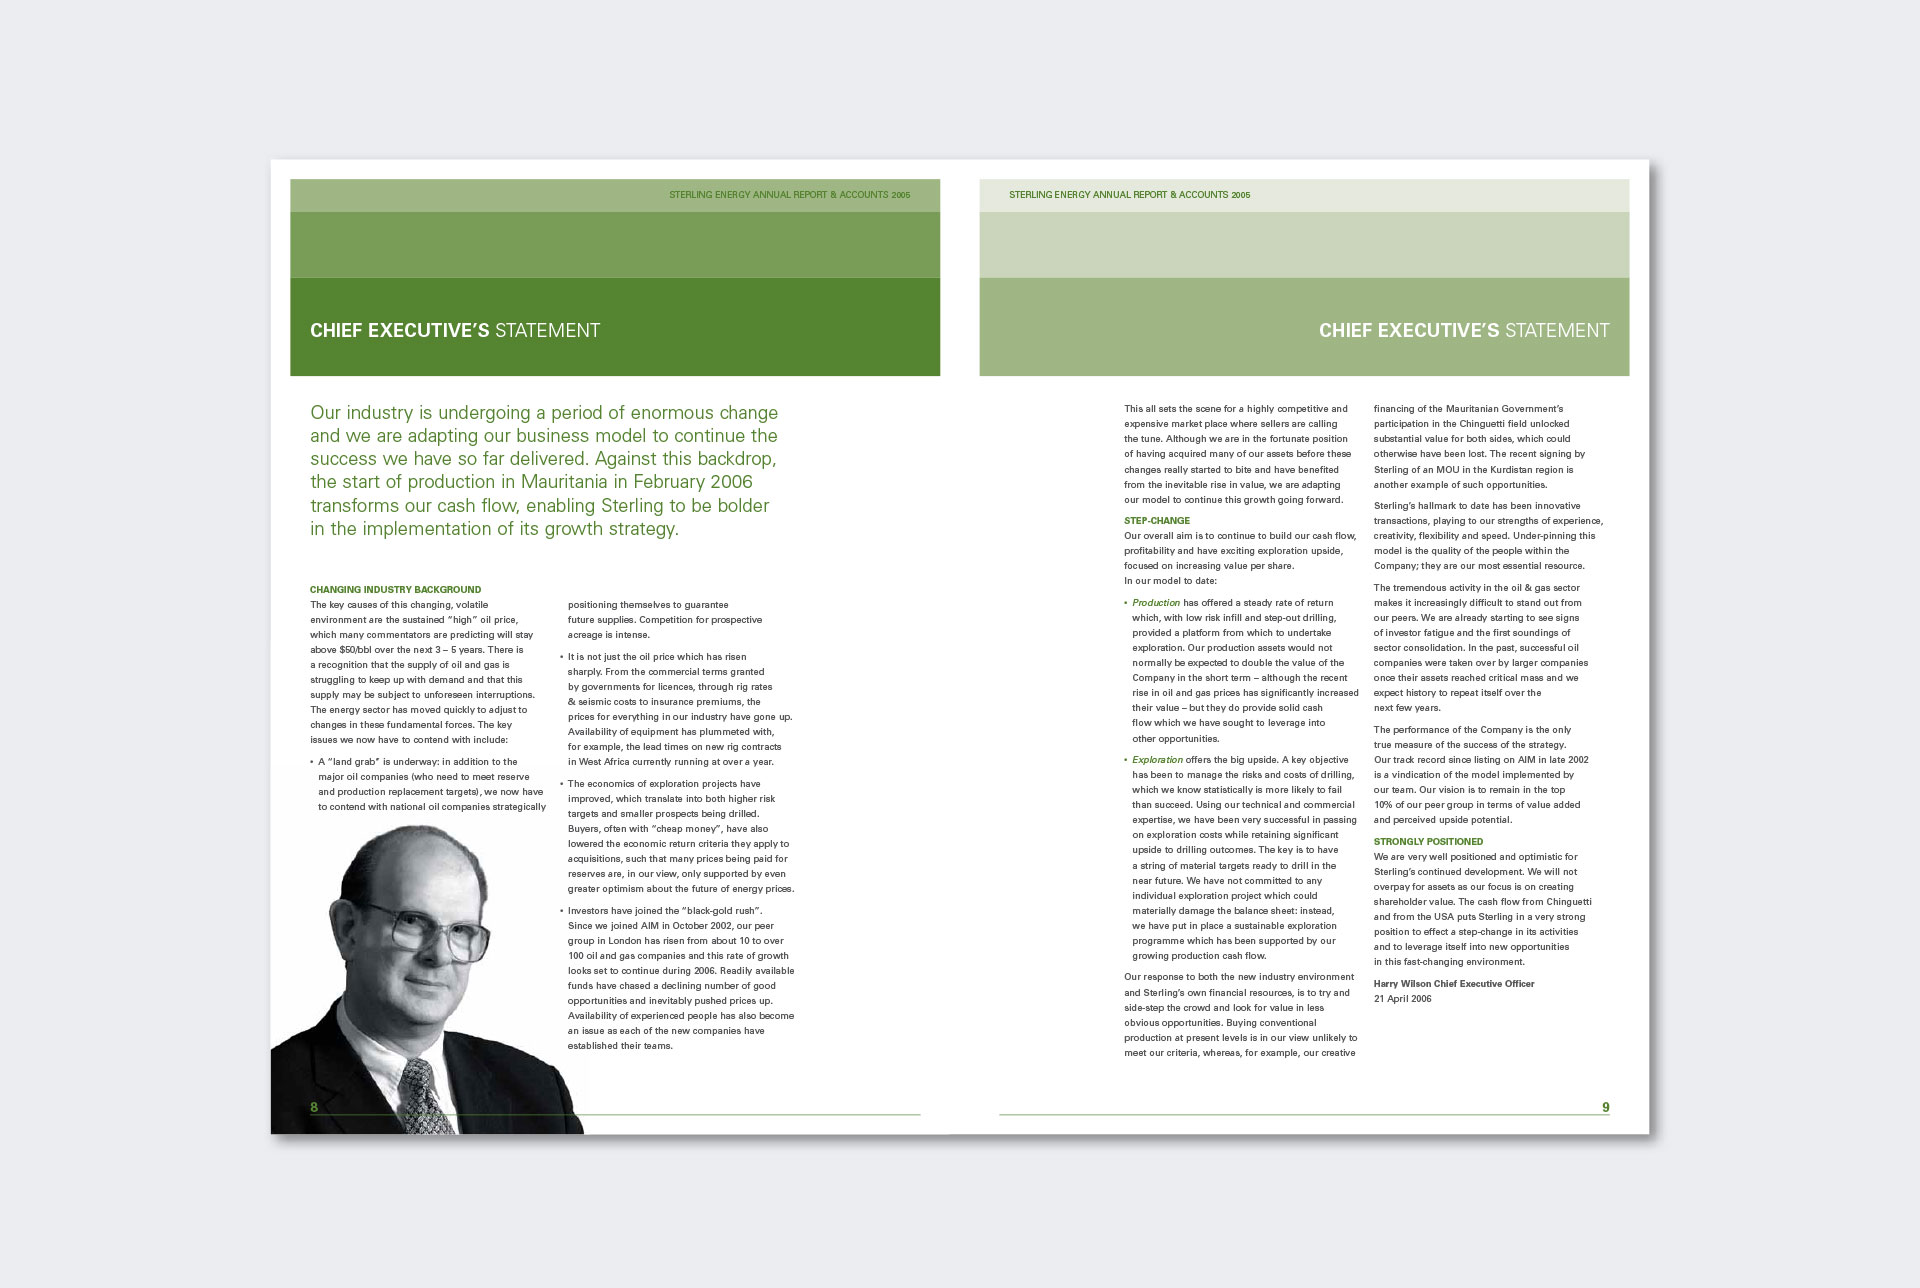 sterling-energy-annual-report-internal-pages.jpg